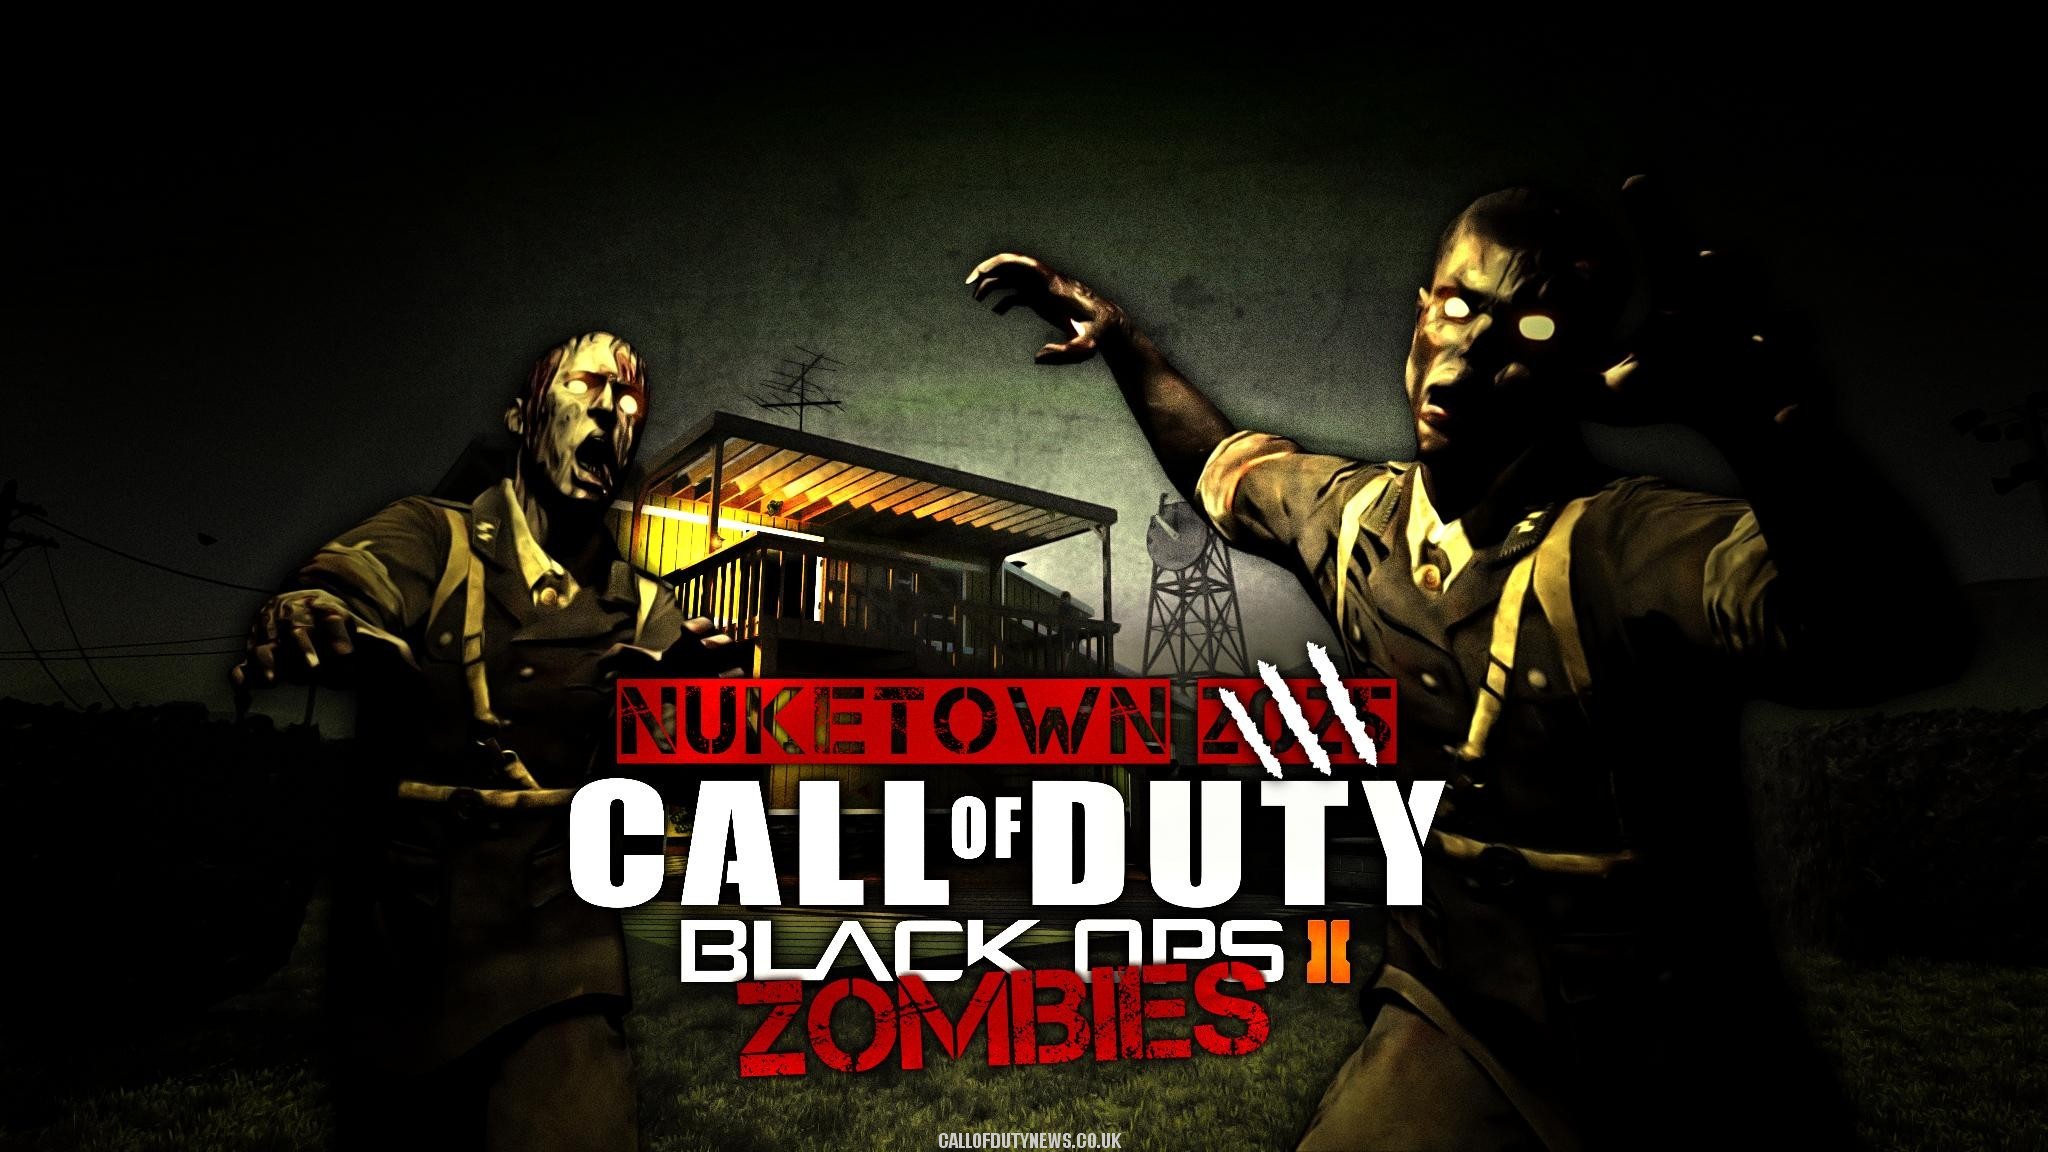 2048x1152 Black ops 2 zombie wallpaper iphone by El-President-ay on DeviantArt |  Adorable Wallpapers | Pinterest | Zombie wallpaper, Black ops and Wallpaper